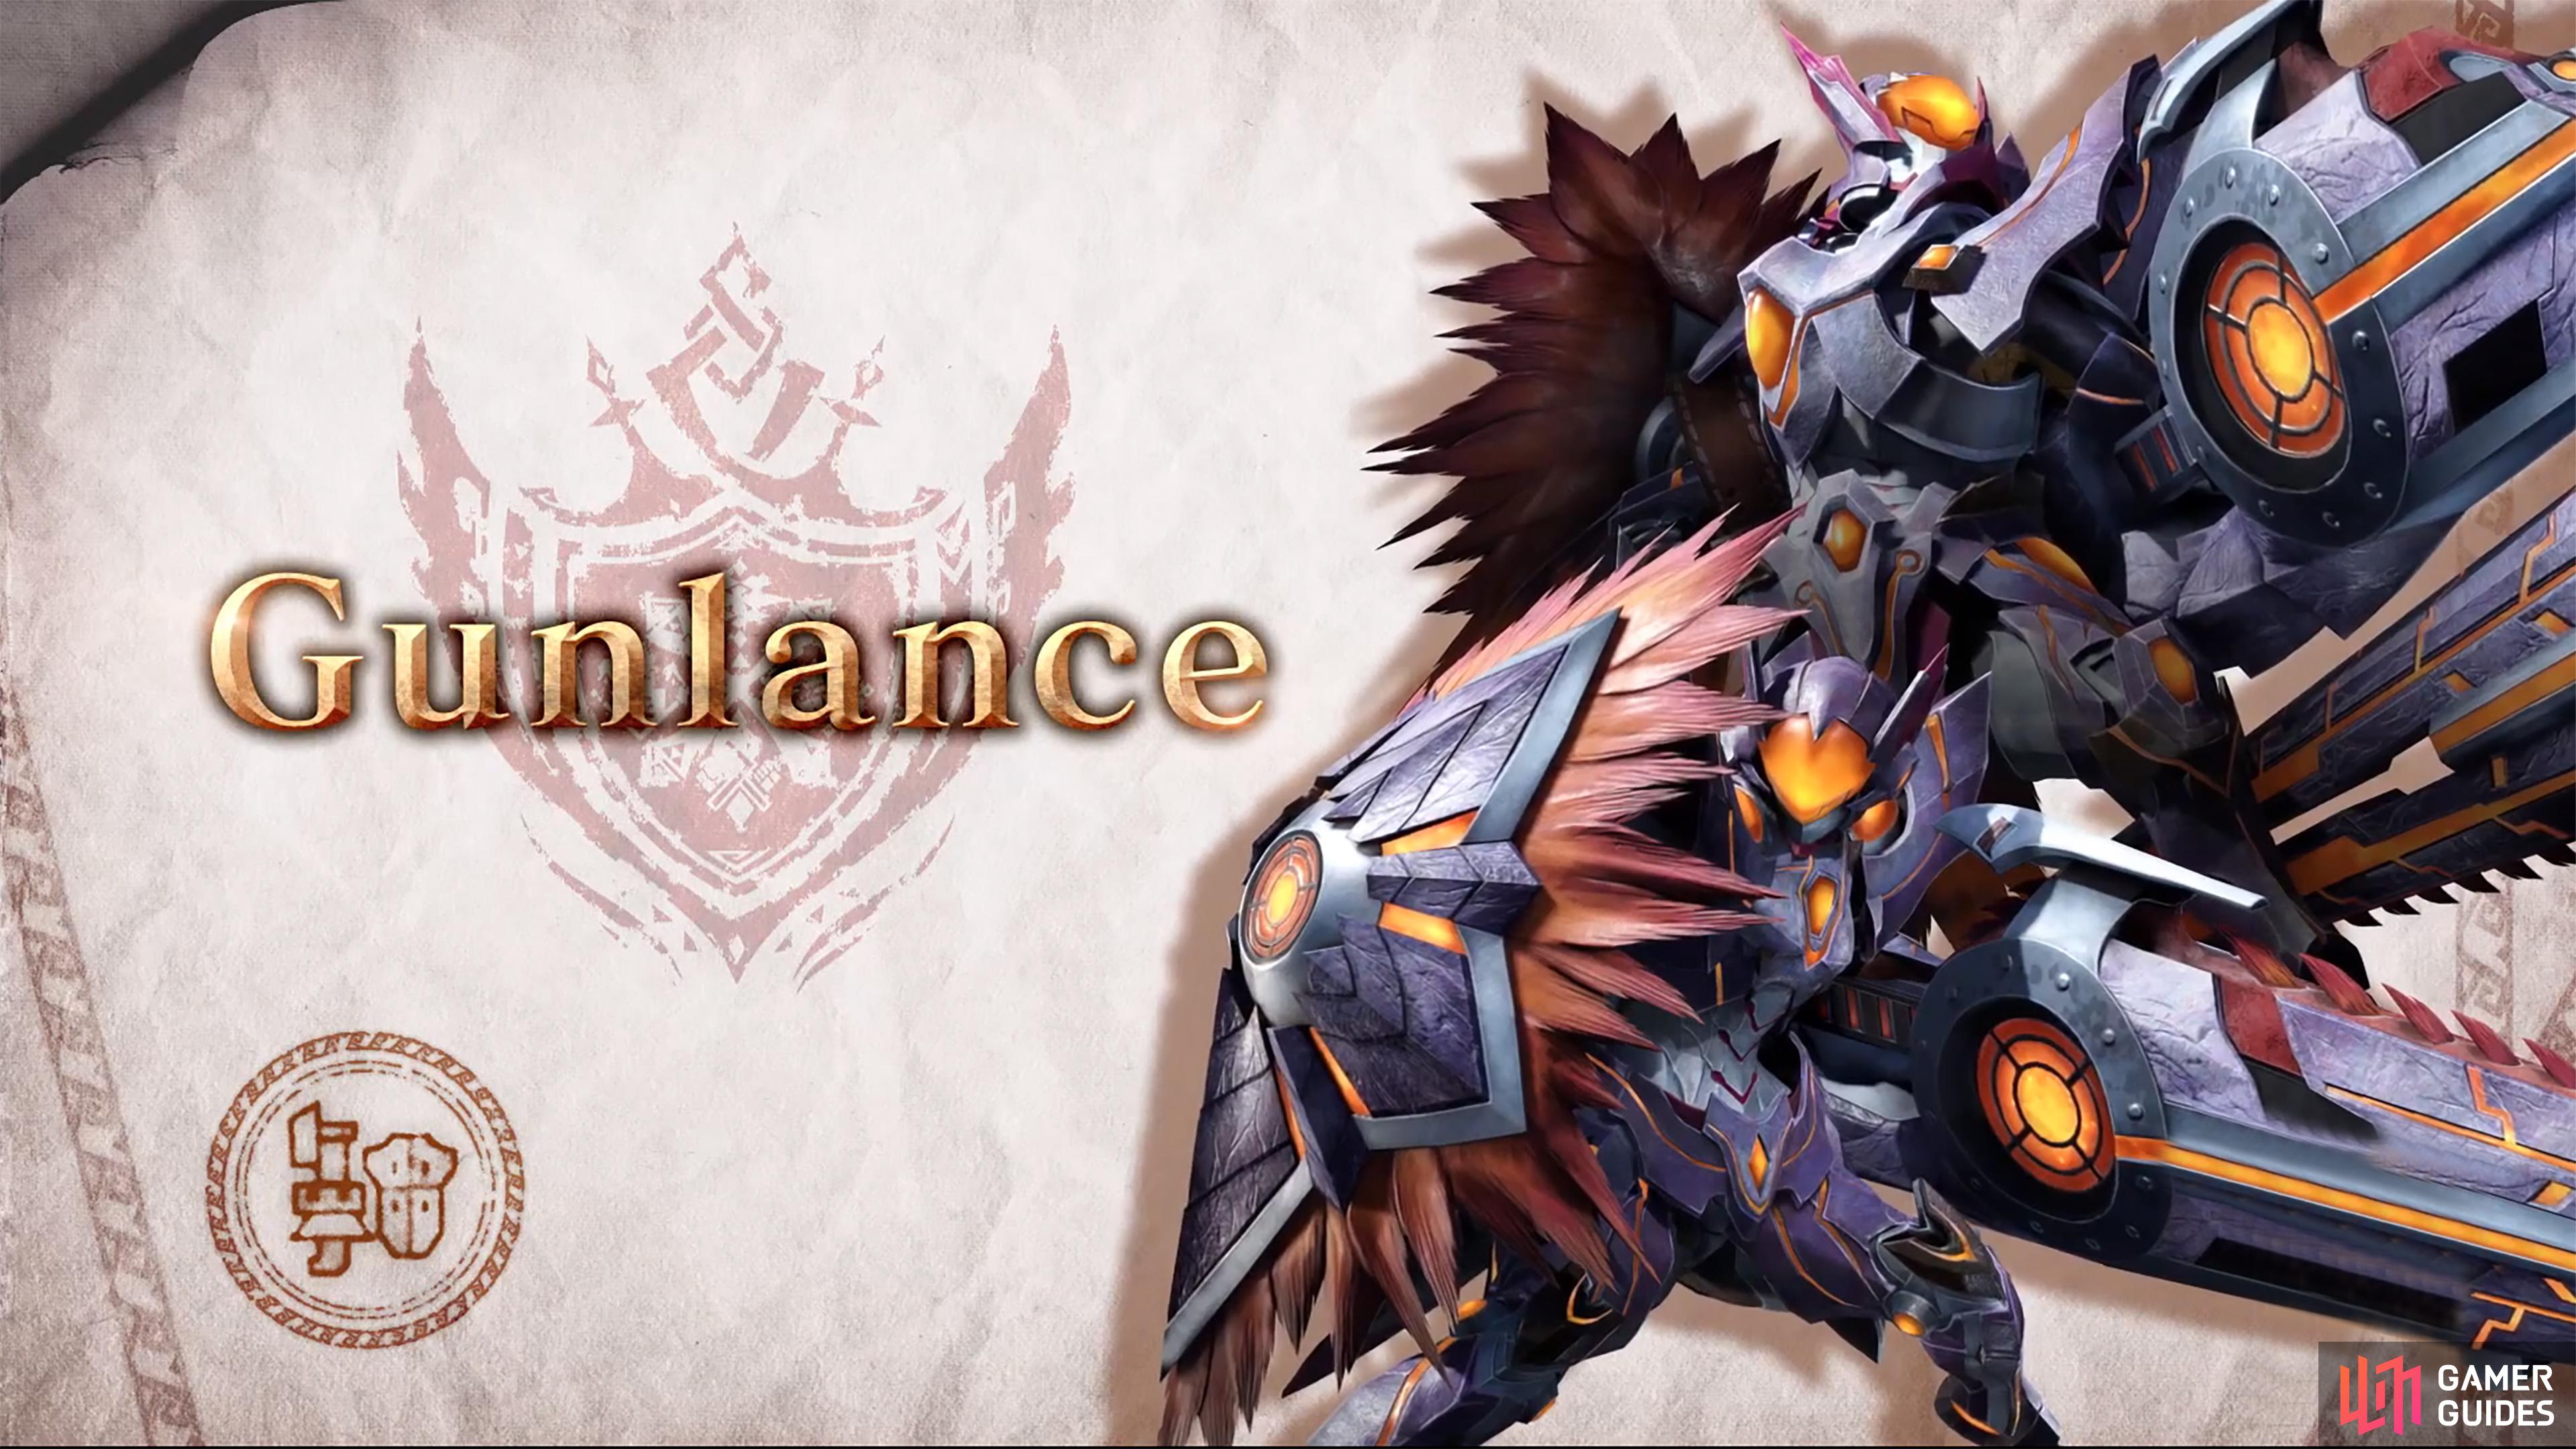 With a cannon attached to its lance, the Gunlance always makes an explosive entrance…